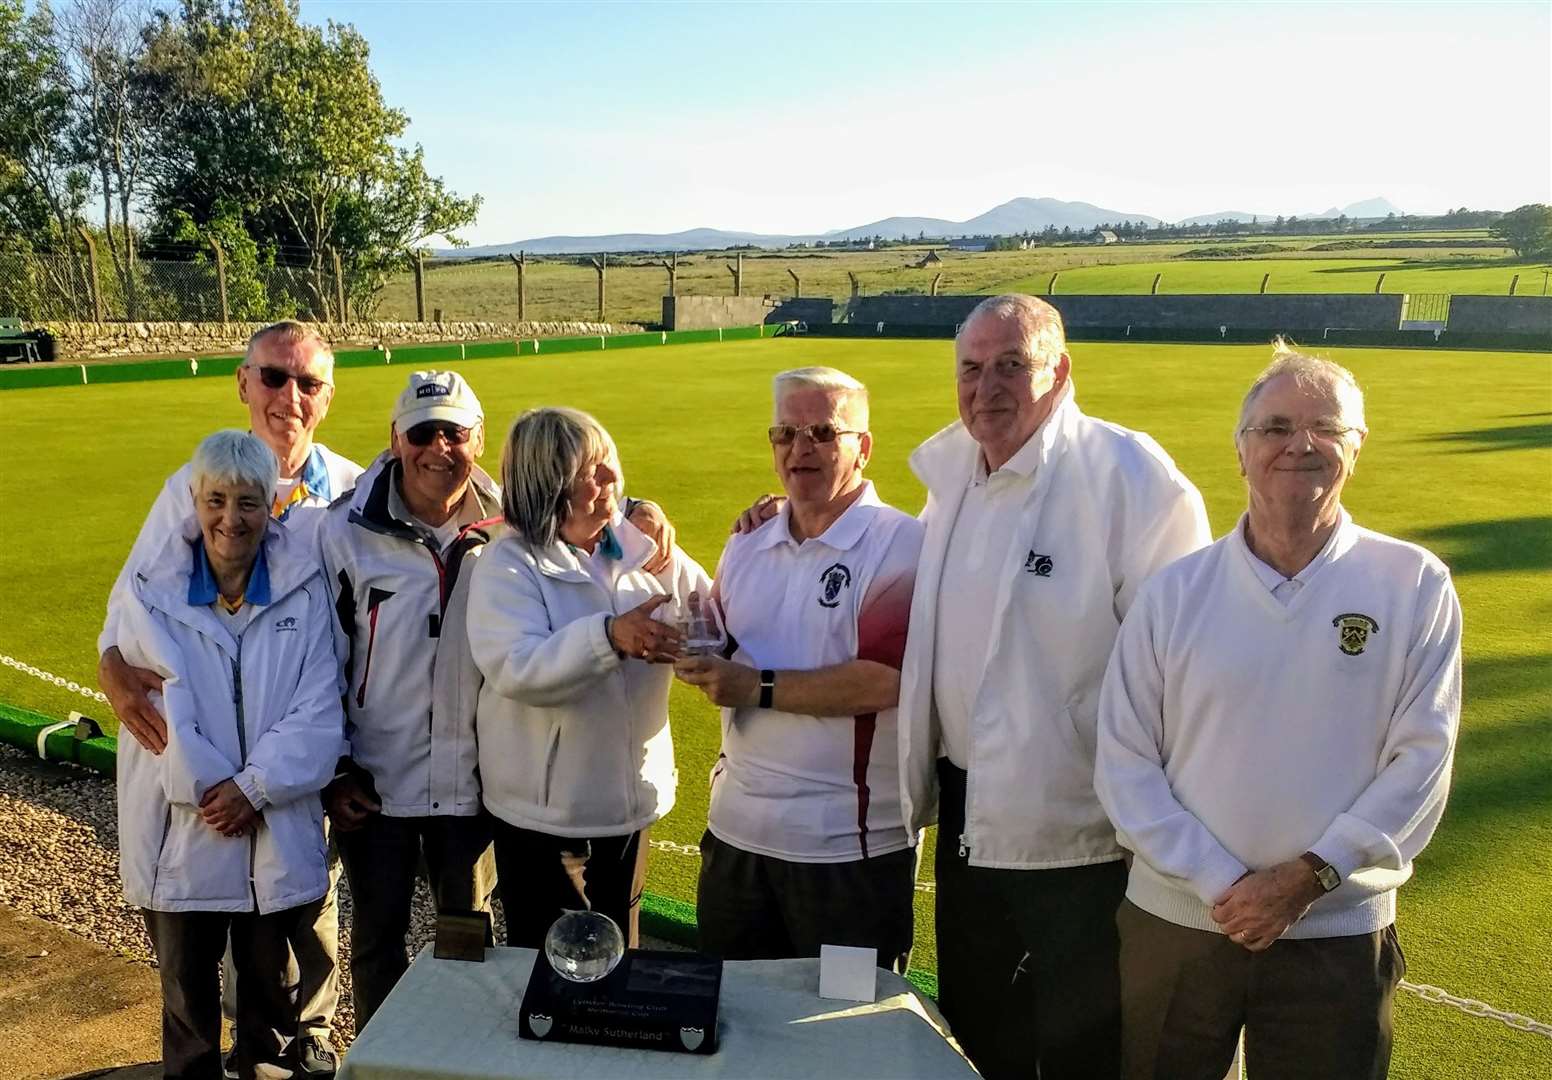 From left: Runners-up K De Jonckheere, A McKillop and P Hollingworth (Dornoch), F Manners, Lybster president, presenting family bowl to J Robertson, I Miller and P Knowles (St Fergus) with the Malky Sutherland Open Trophy on the table.